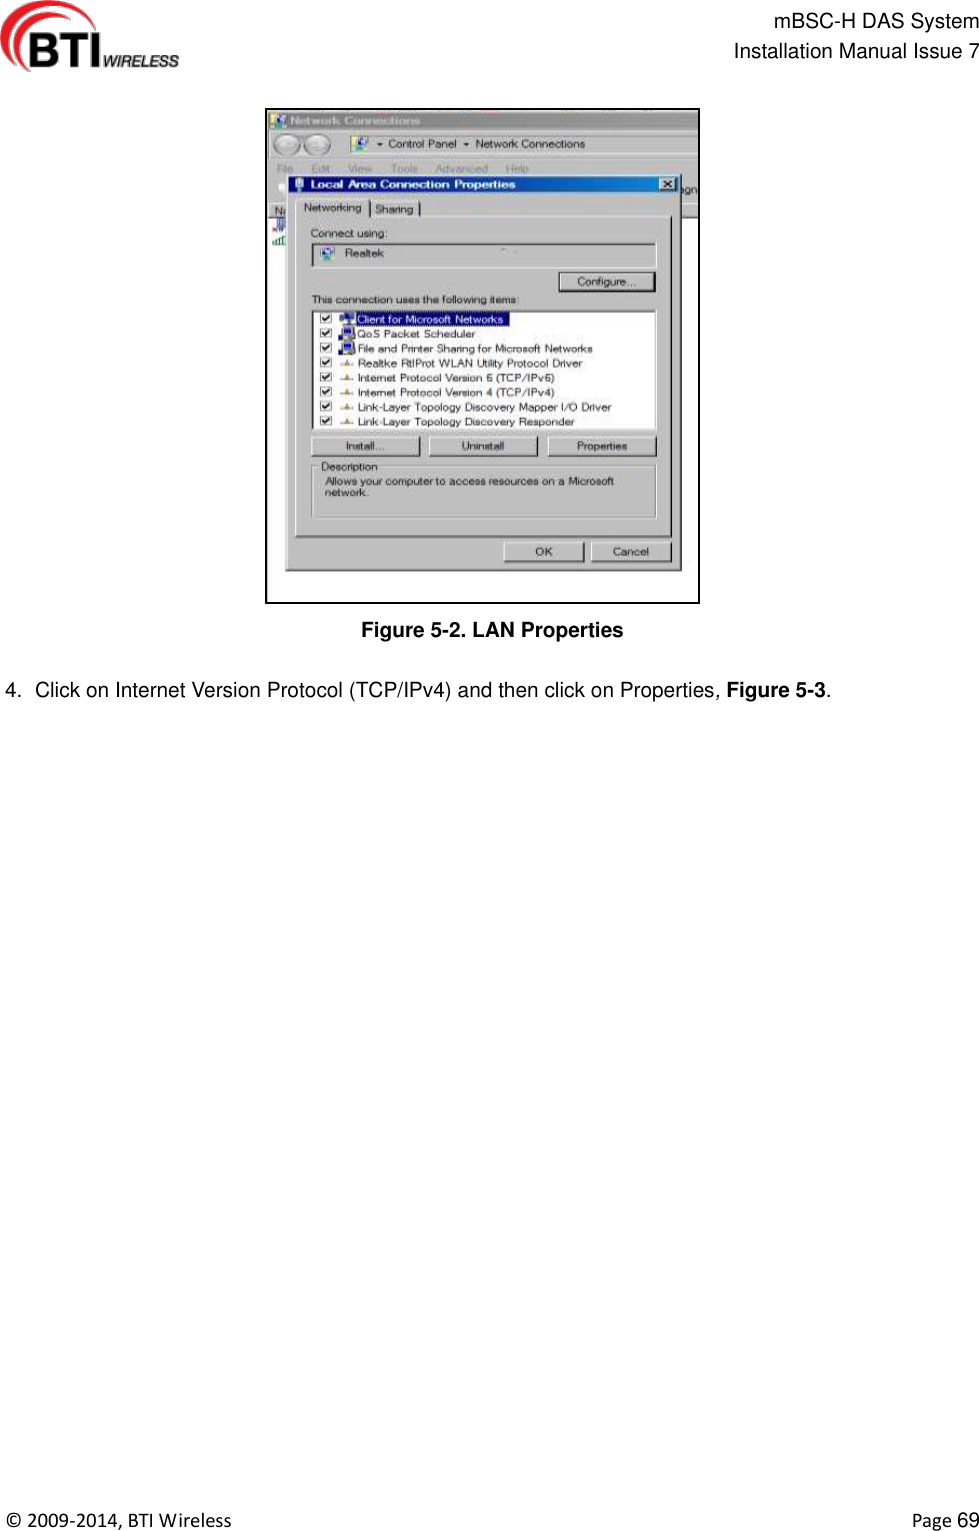                                                   mBSC-H DAS System   Installation Manual Issue 7  ©  2009-2014, BTI Wireless    Page 69  Figure 5-2. LAN Properties  4.  Click on Internet Version Protocol (TCP/IPv4) and then click on Properties, Figure 5-3.  